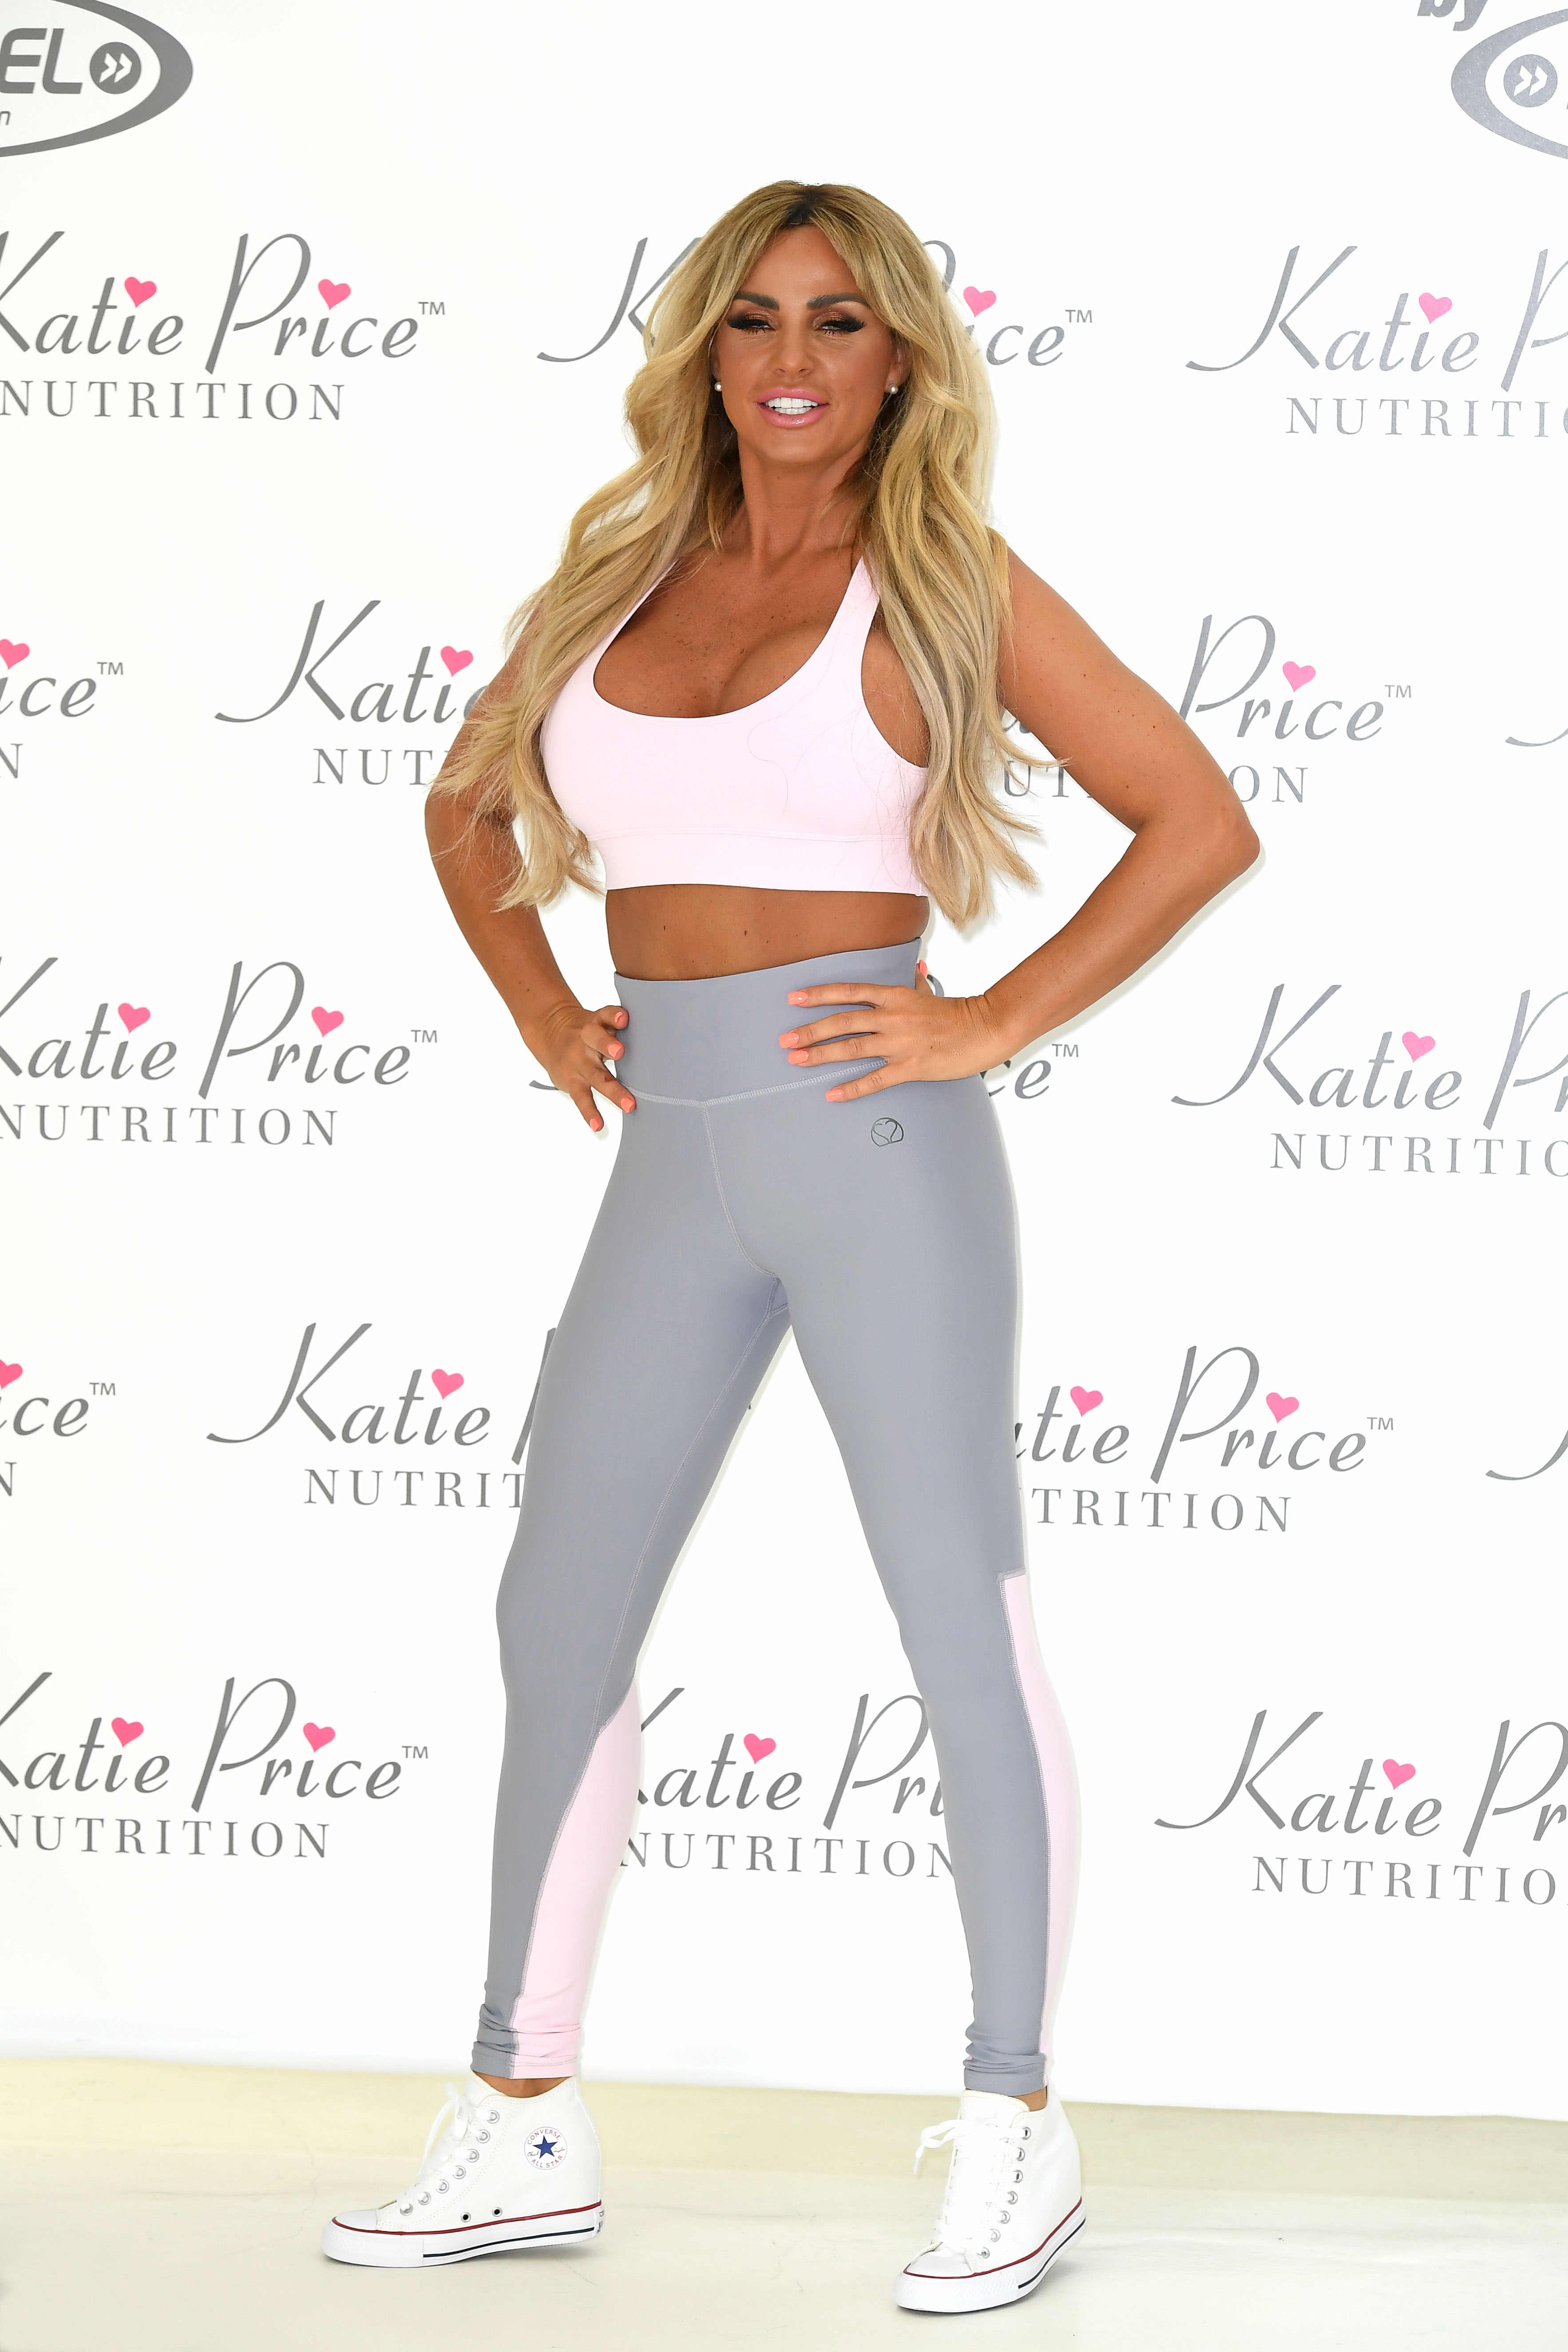 Katie Price Is Right, She’s The Hottest